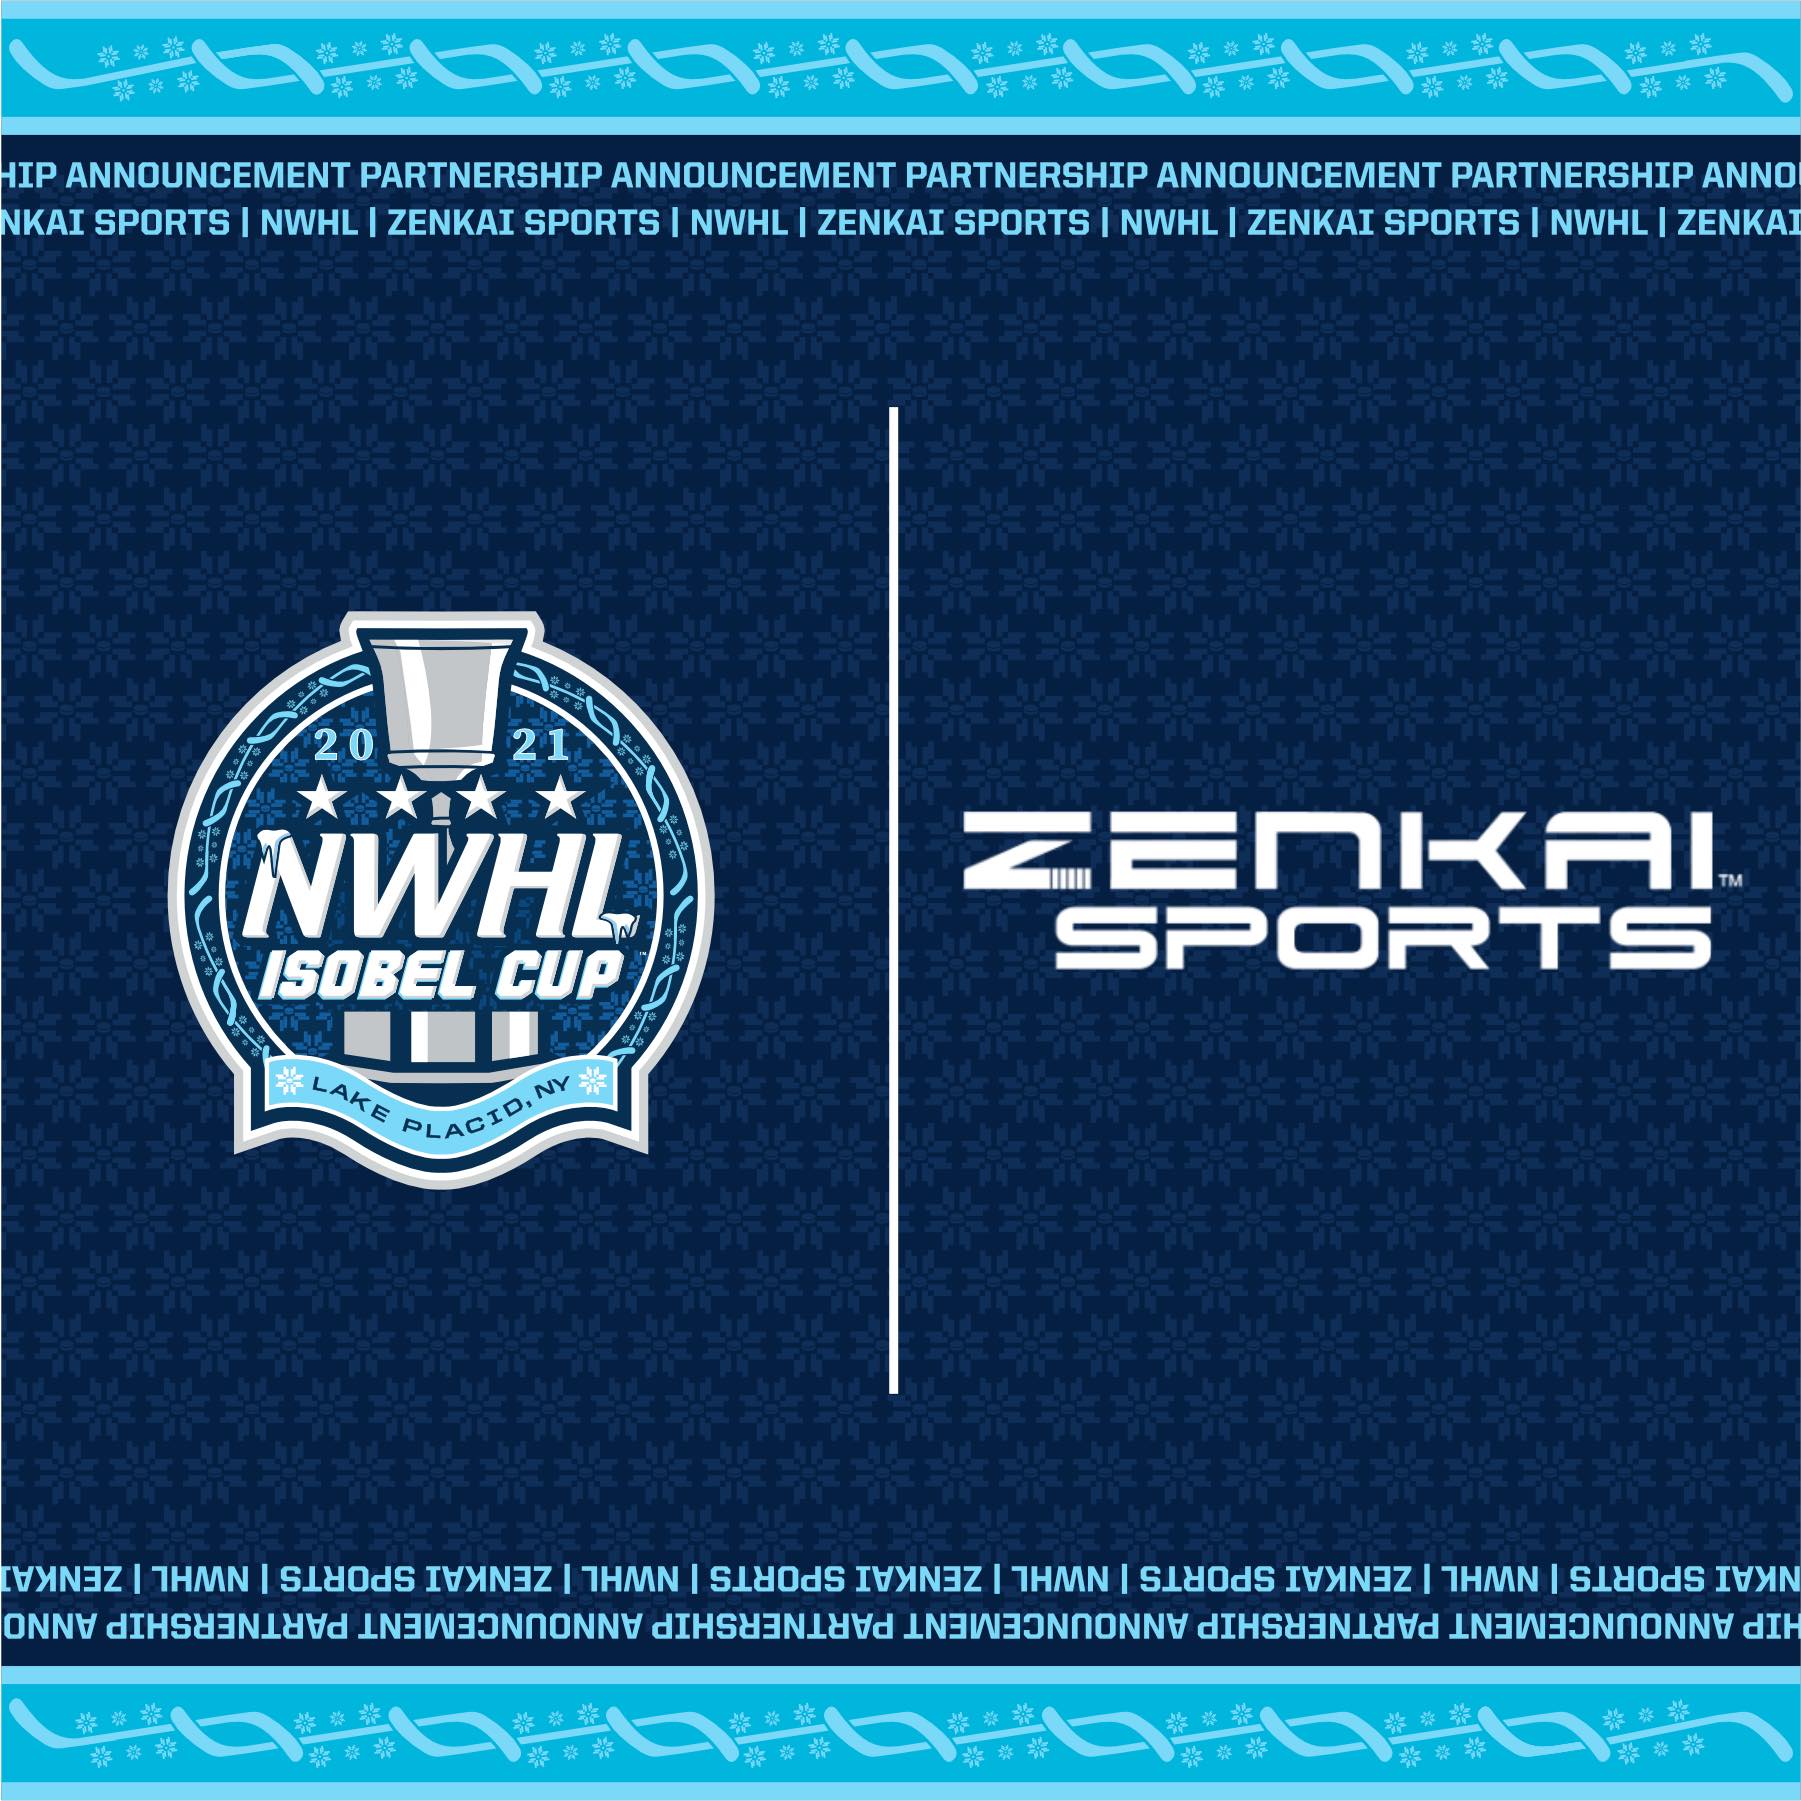 Zenkai Sports becomes The Official Performance Apparel Partner of the NWHL